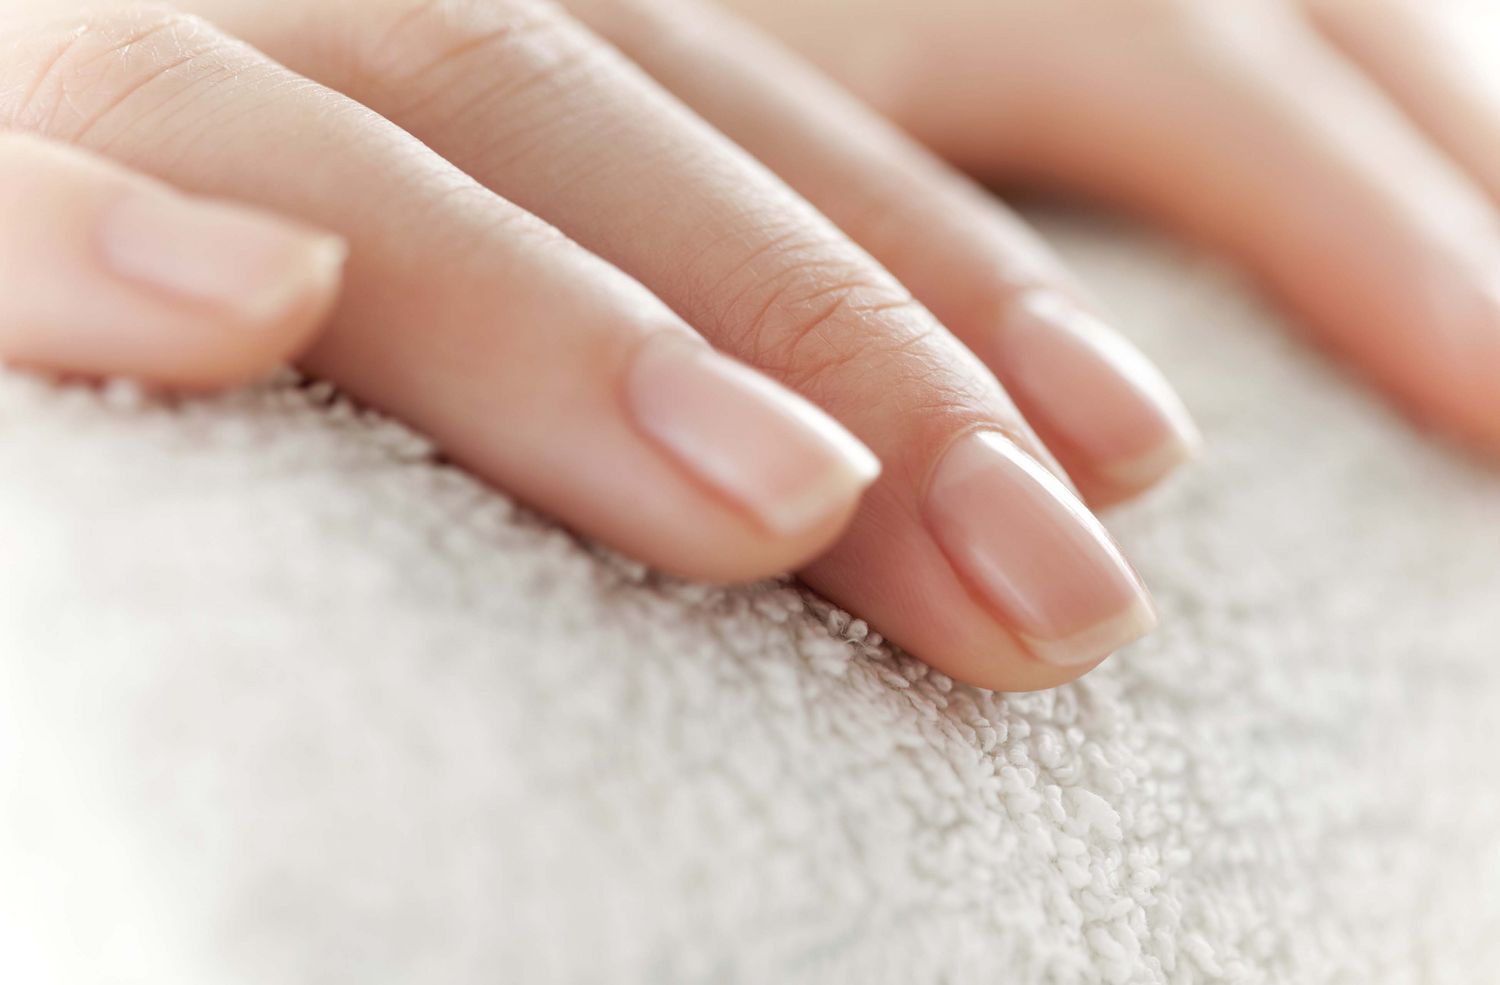 Top 10 Nail Care Tips for Healthy and Strong Nails - wide 2